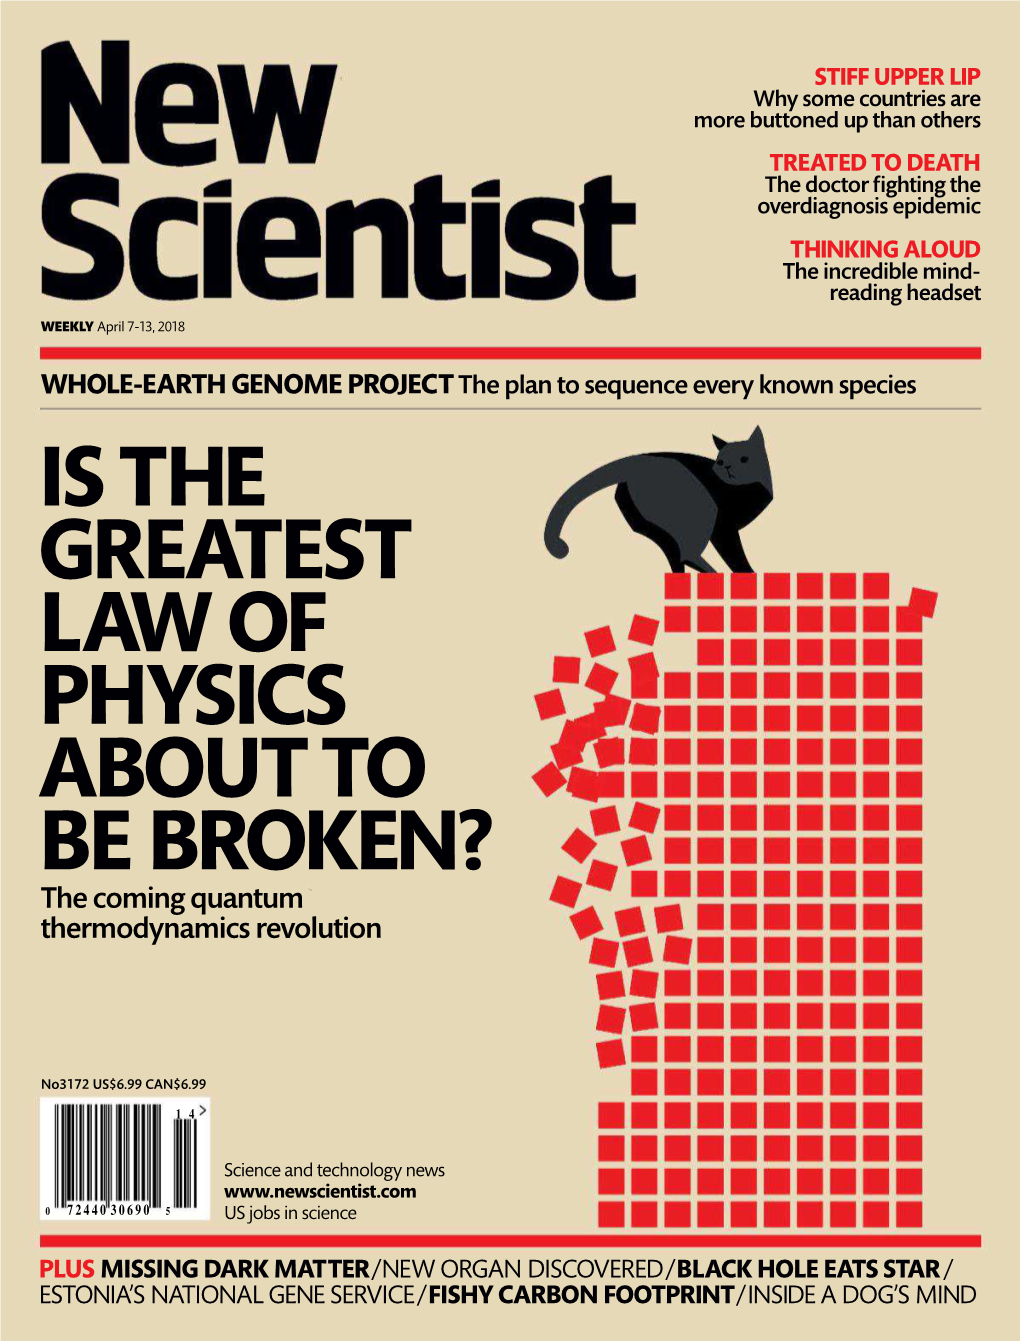 IS the GREATEST LAW of PHYSICS ABOUT to BE BROKEN? the Coming Quantum Thermodynamics Revolution